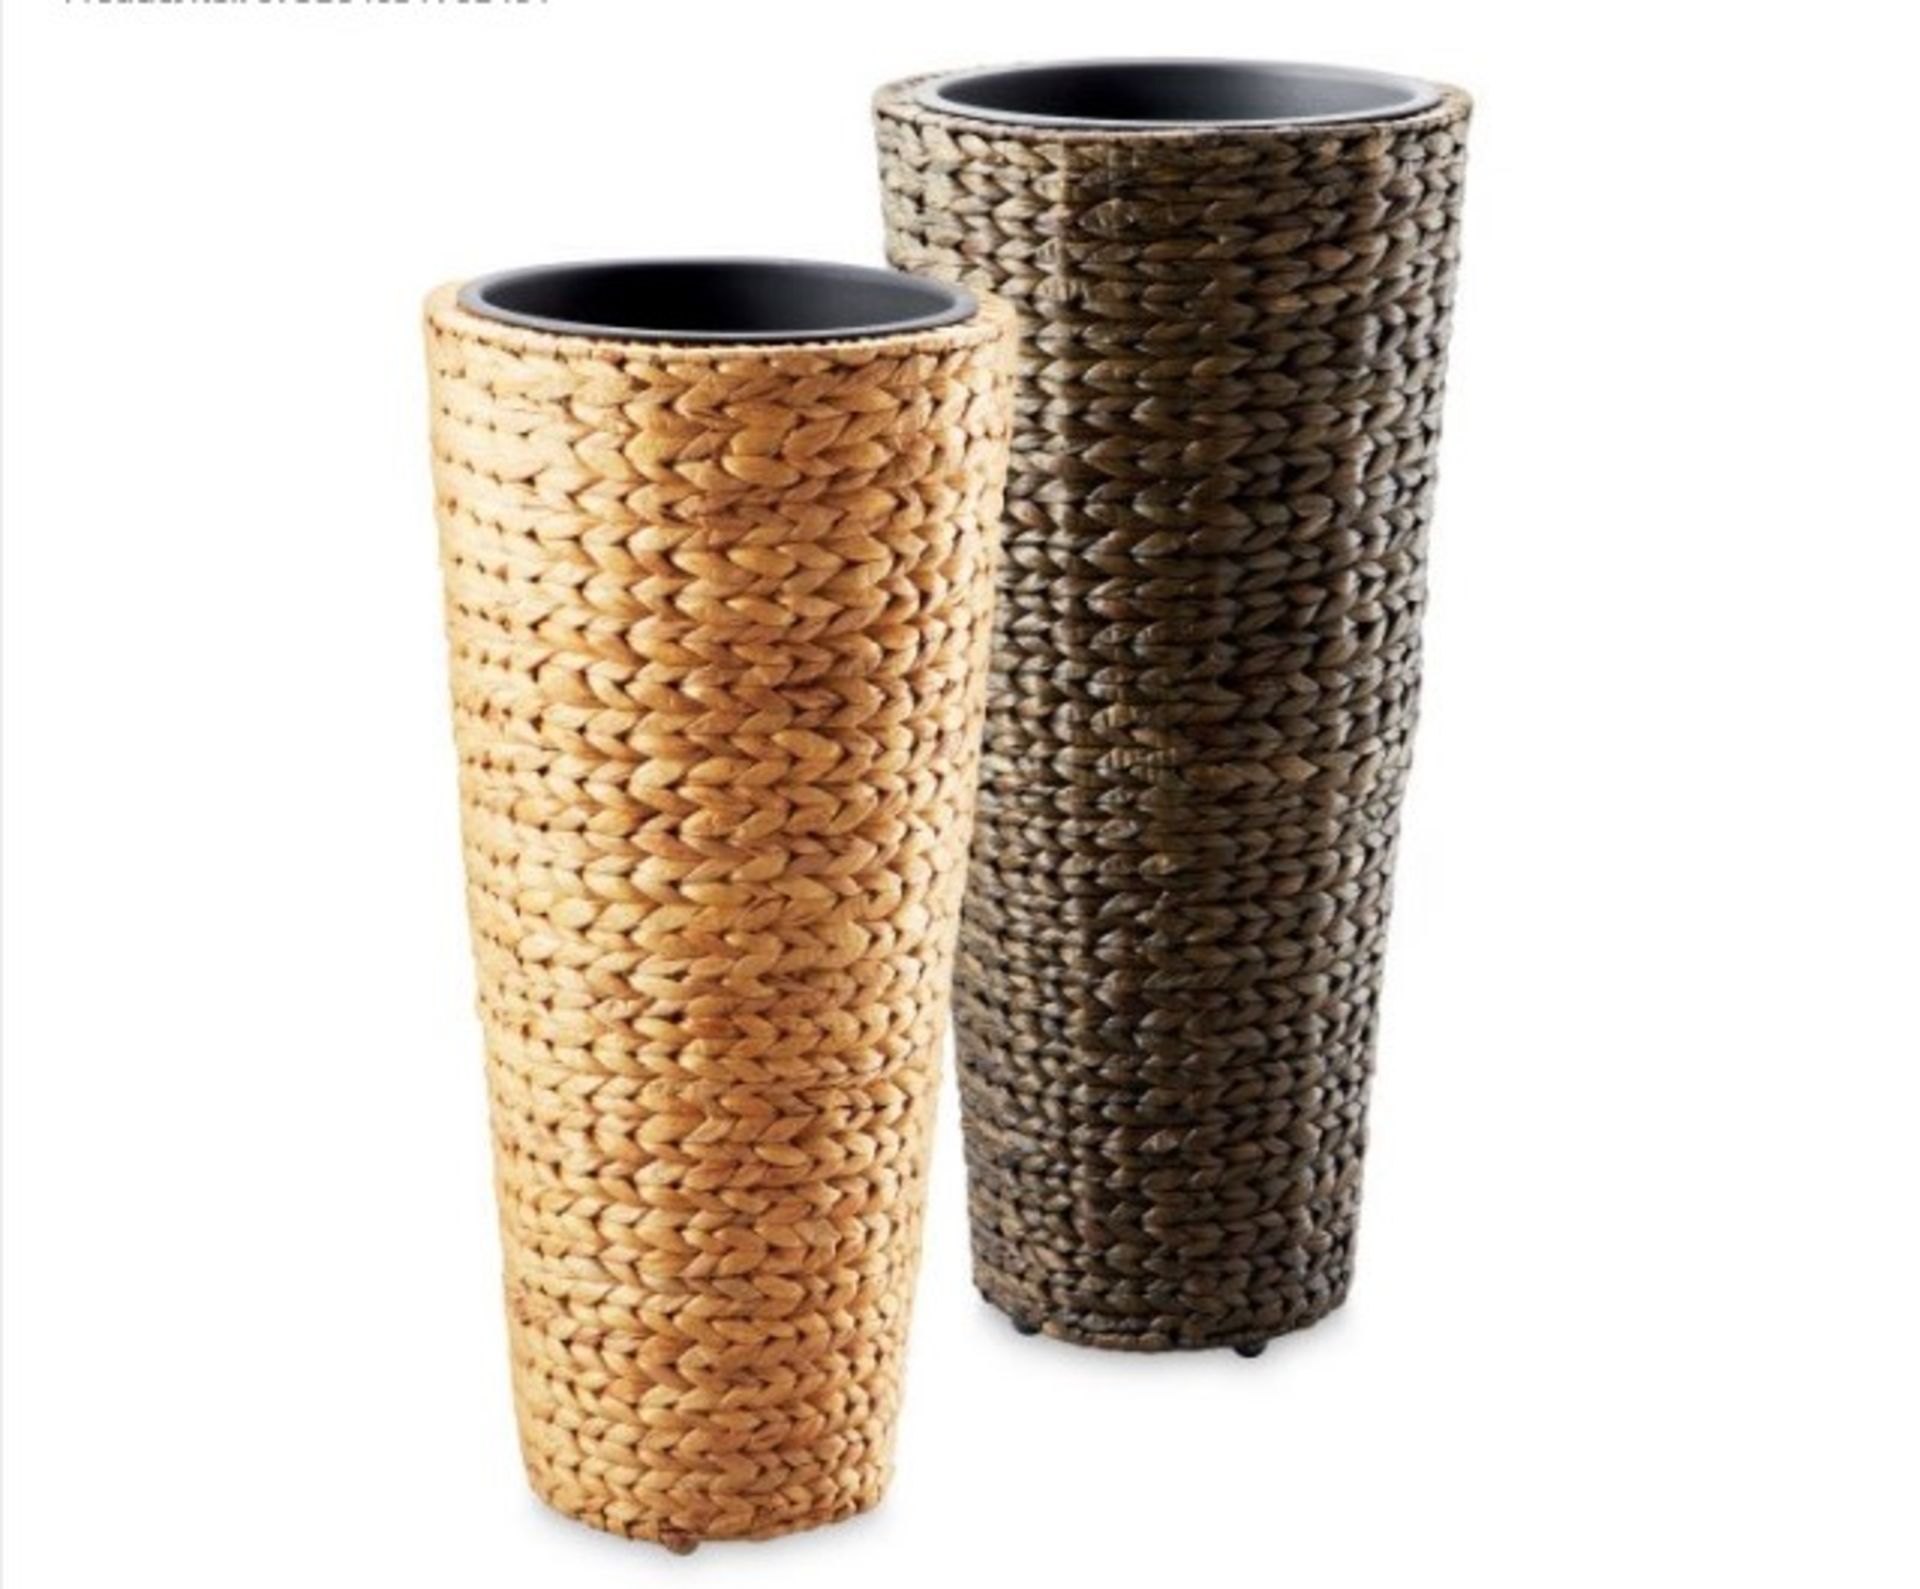 V Brand New 60cm Rattan Weave Planter - With Removable Planting Bin - Feet for Floor Protection - - Image 2 of 3